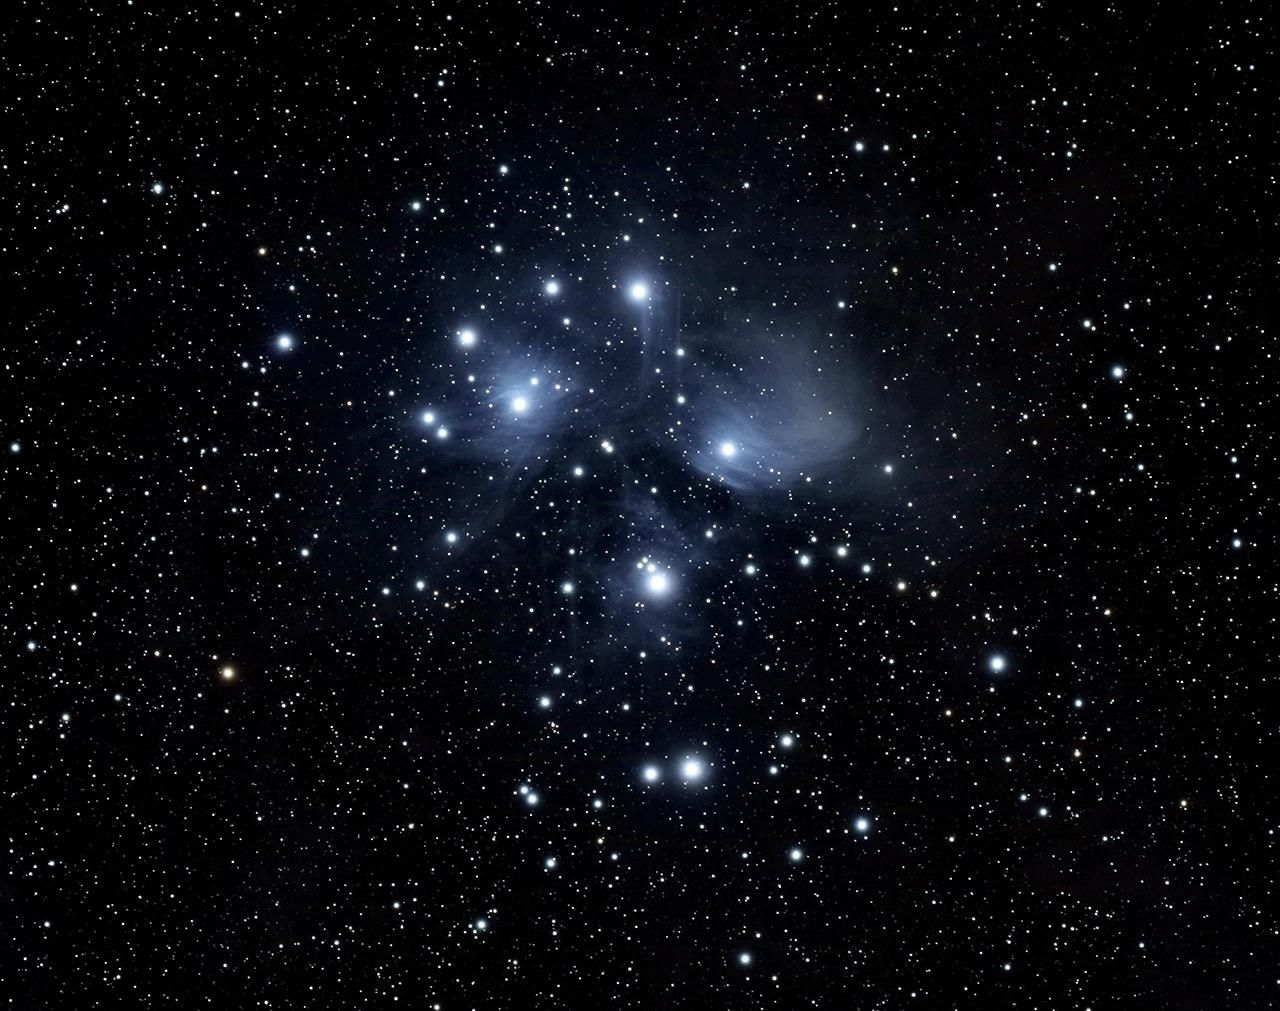 An image showing 'Awash in Blue Starlight'